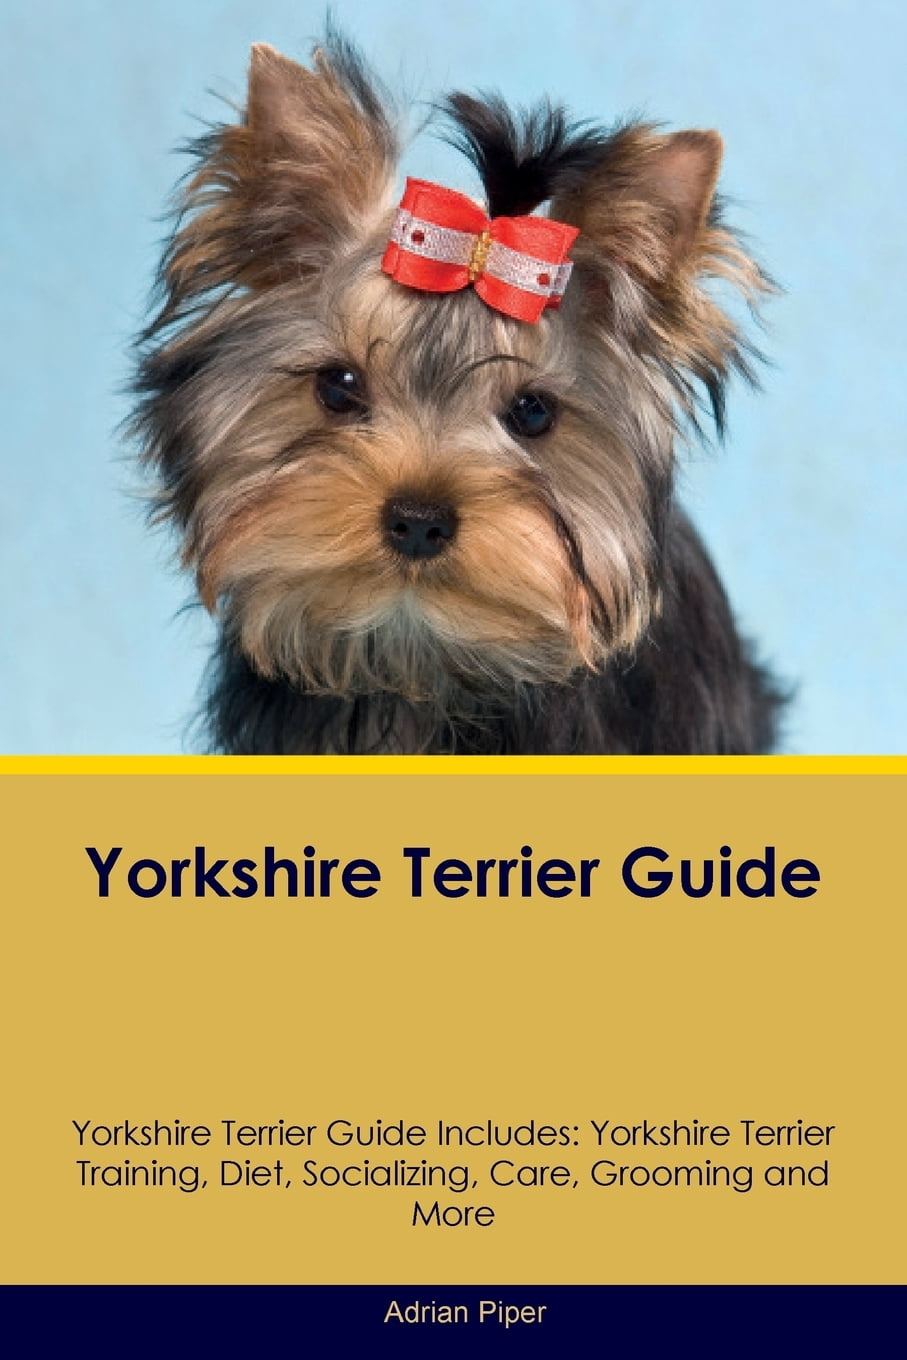 Yorkshire Terrier Guide Yorkshire Terrier Guide Includes : Yorkshire ...